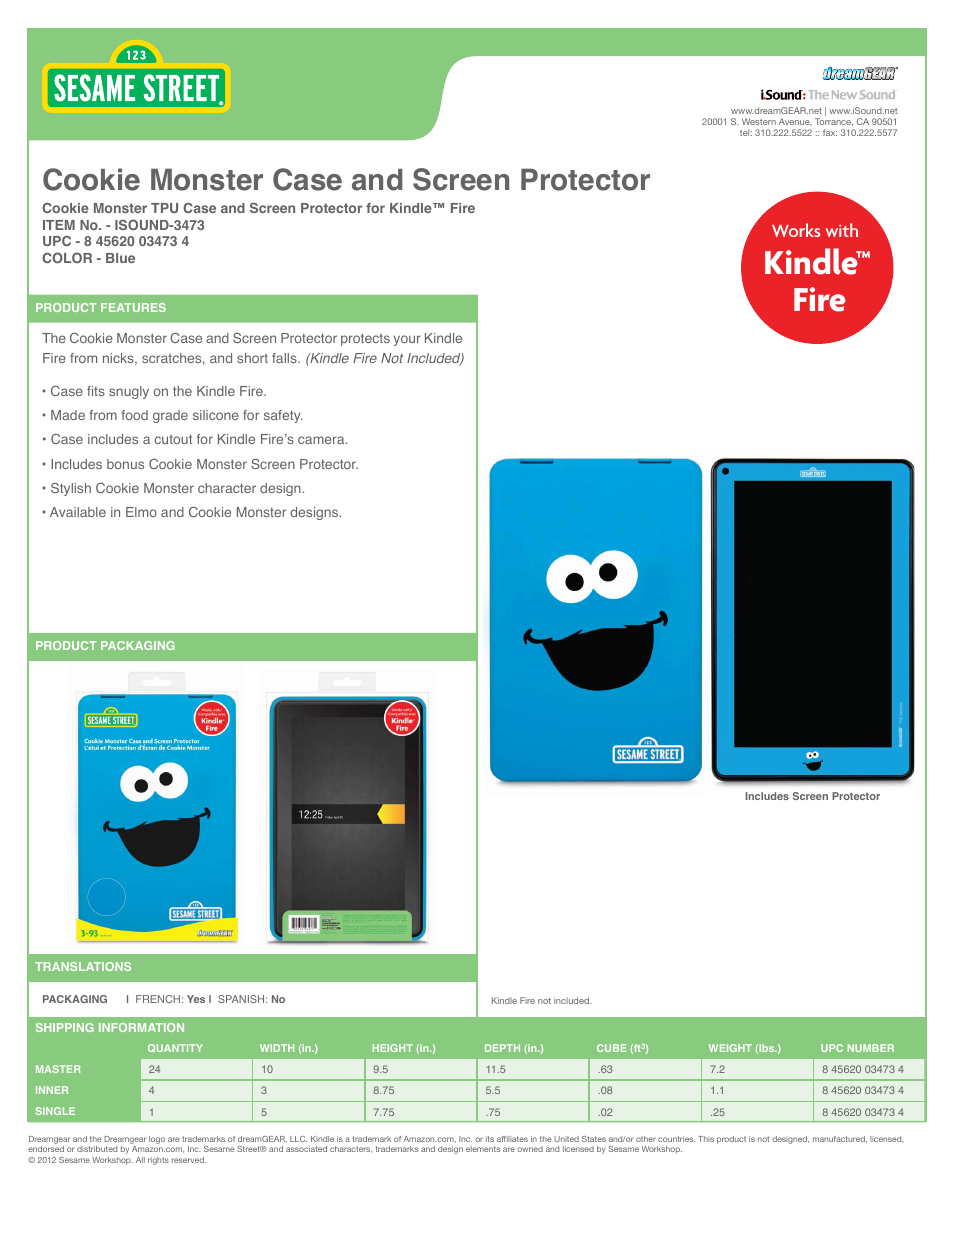 Cookie Monster Case and Screen Protector for Kindle Fire - Sell Sheet